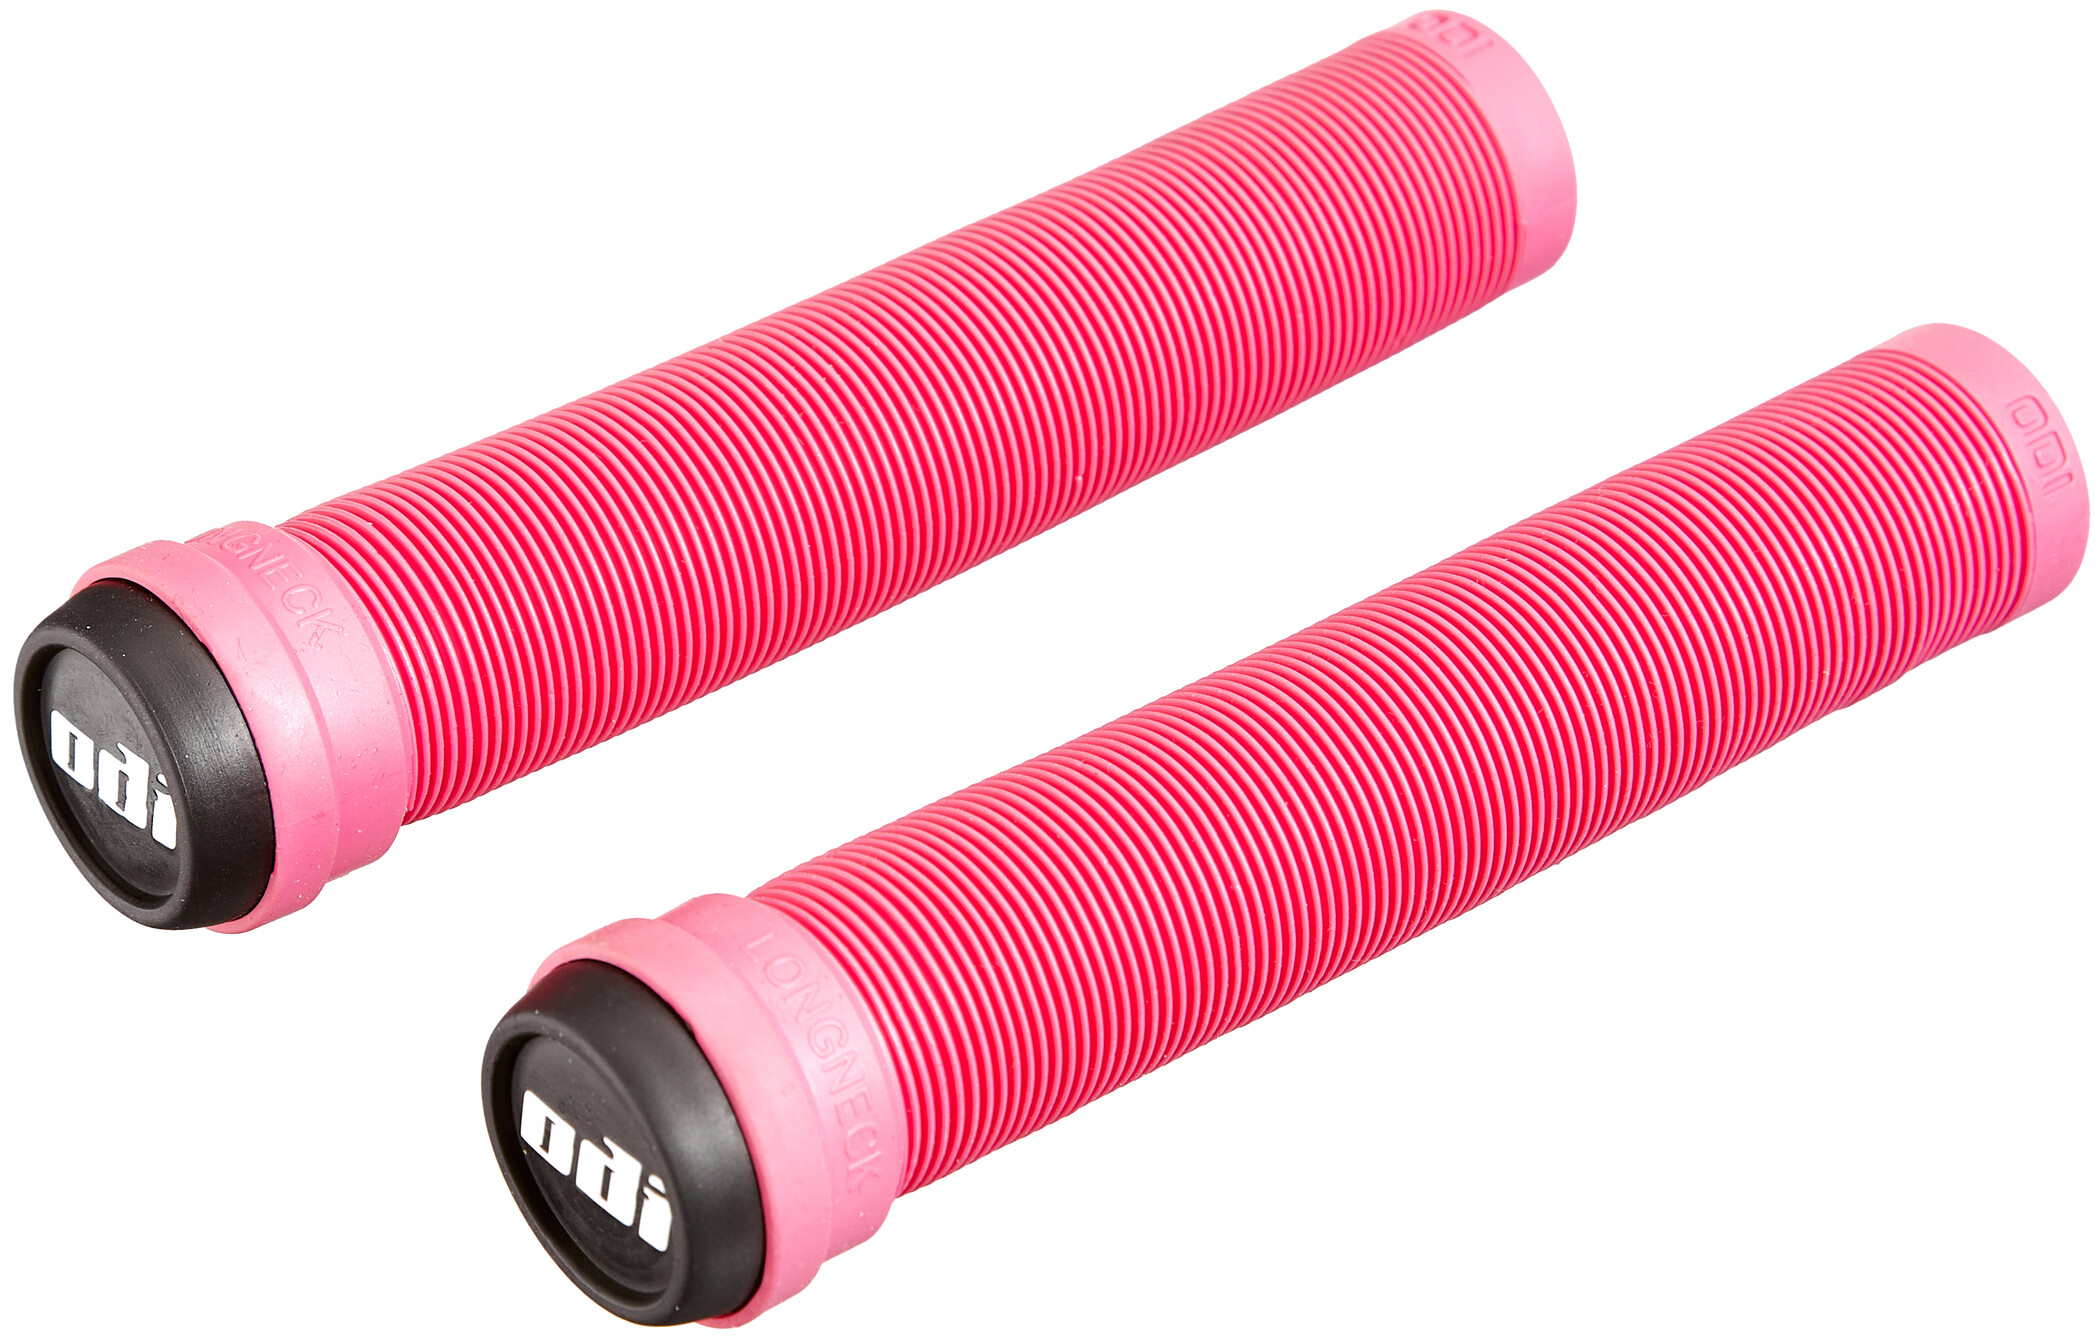 ODI "O" PURPLE FLANGED BMX BICYCLE SCOOTER FIXED GRIPS 